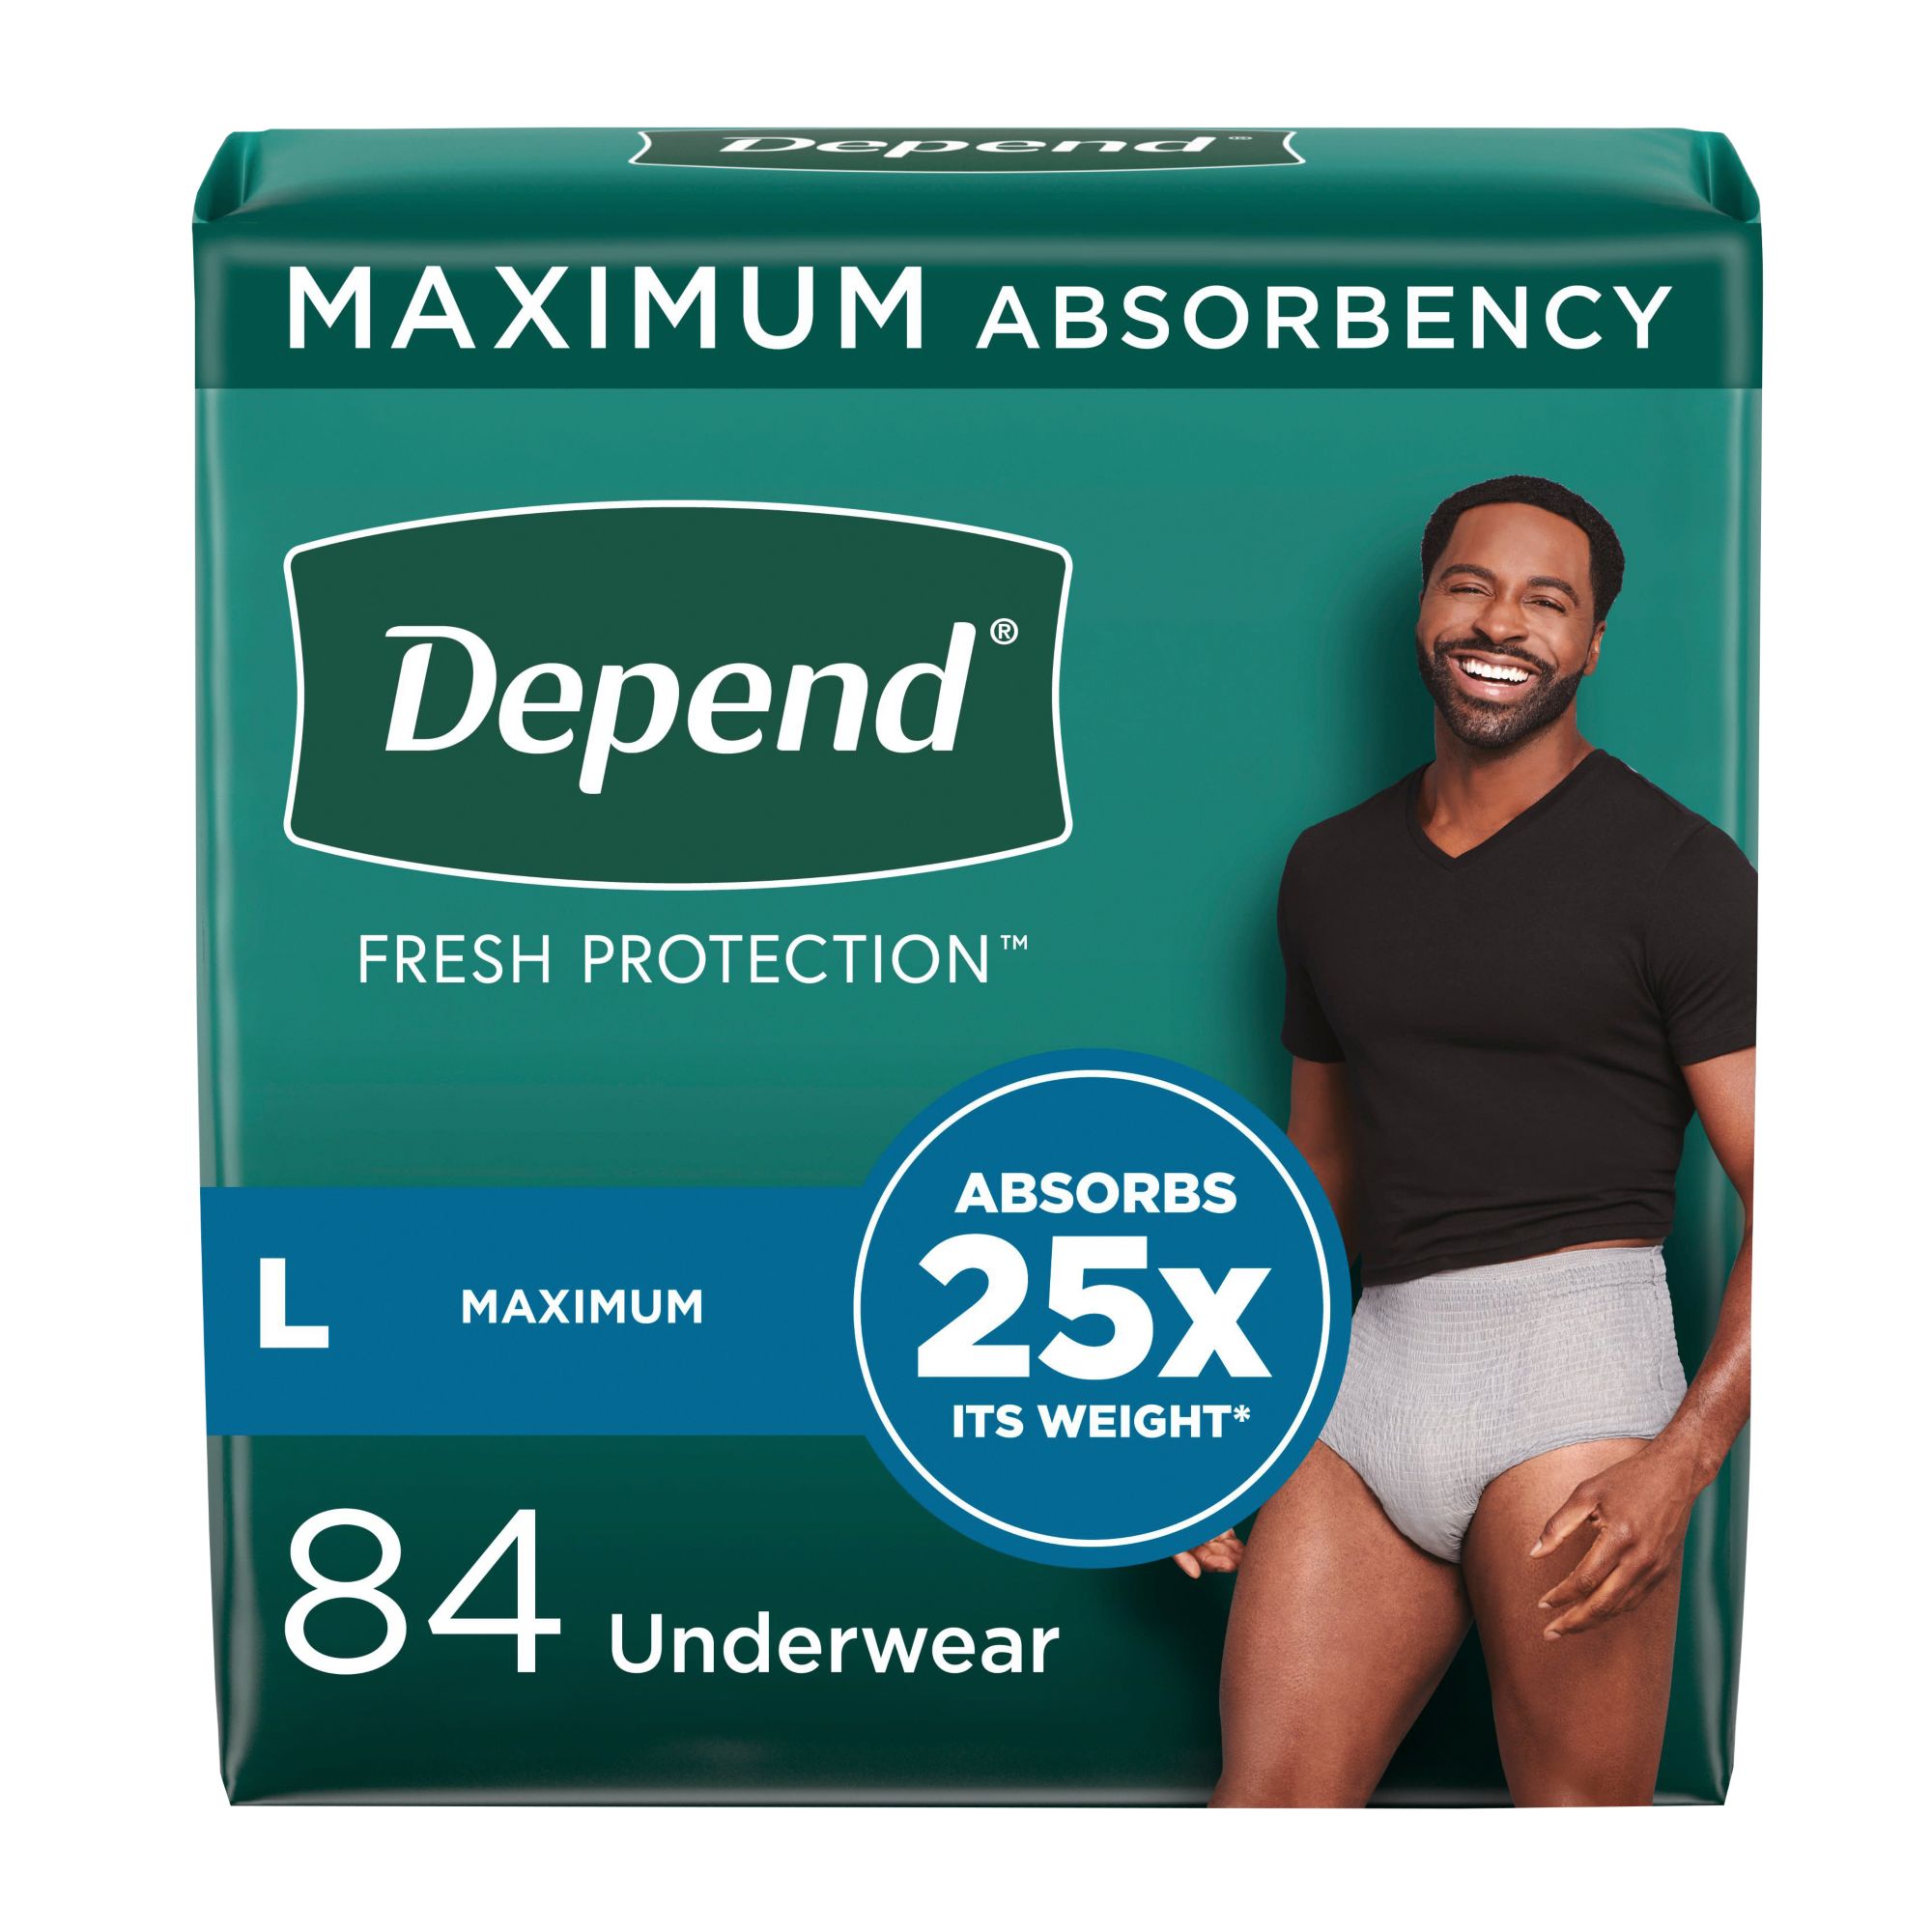 Express Factory Outlet: Buy 2 underwear for $20 or Buy a 2-pack